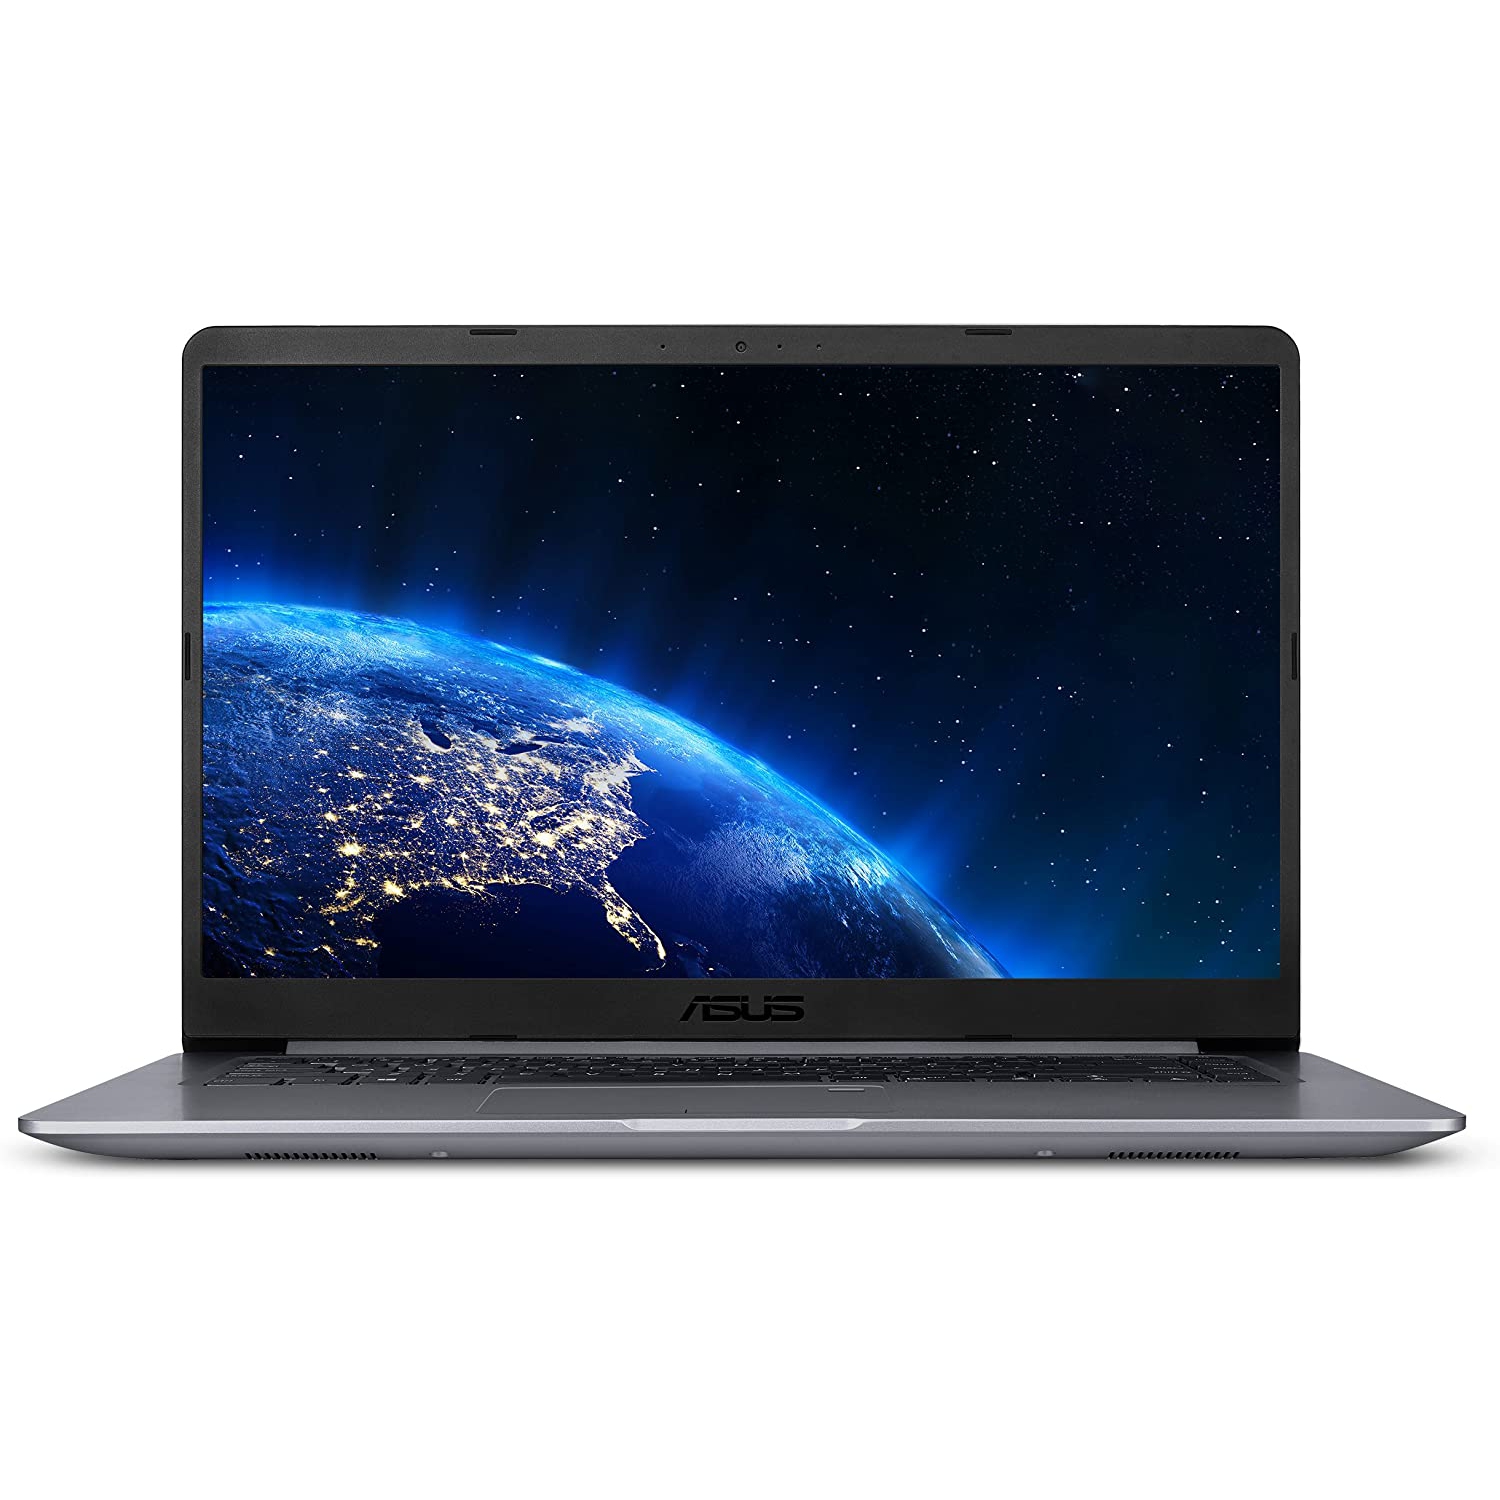 Refurbished (Excellent) - ASUS VivoBook F510UA Thin and Lightweight 15.6" FHD WideView NanoEdge Laptop Intel Core i57200U 2.5GHz 8GB DDR4 RAM 1TB HDD Win 10 F510UAAH50